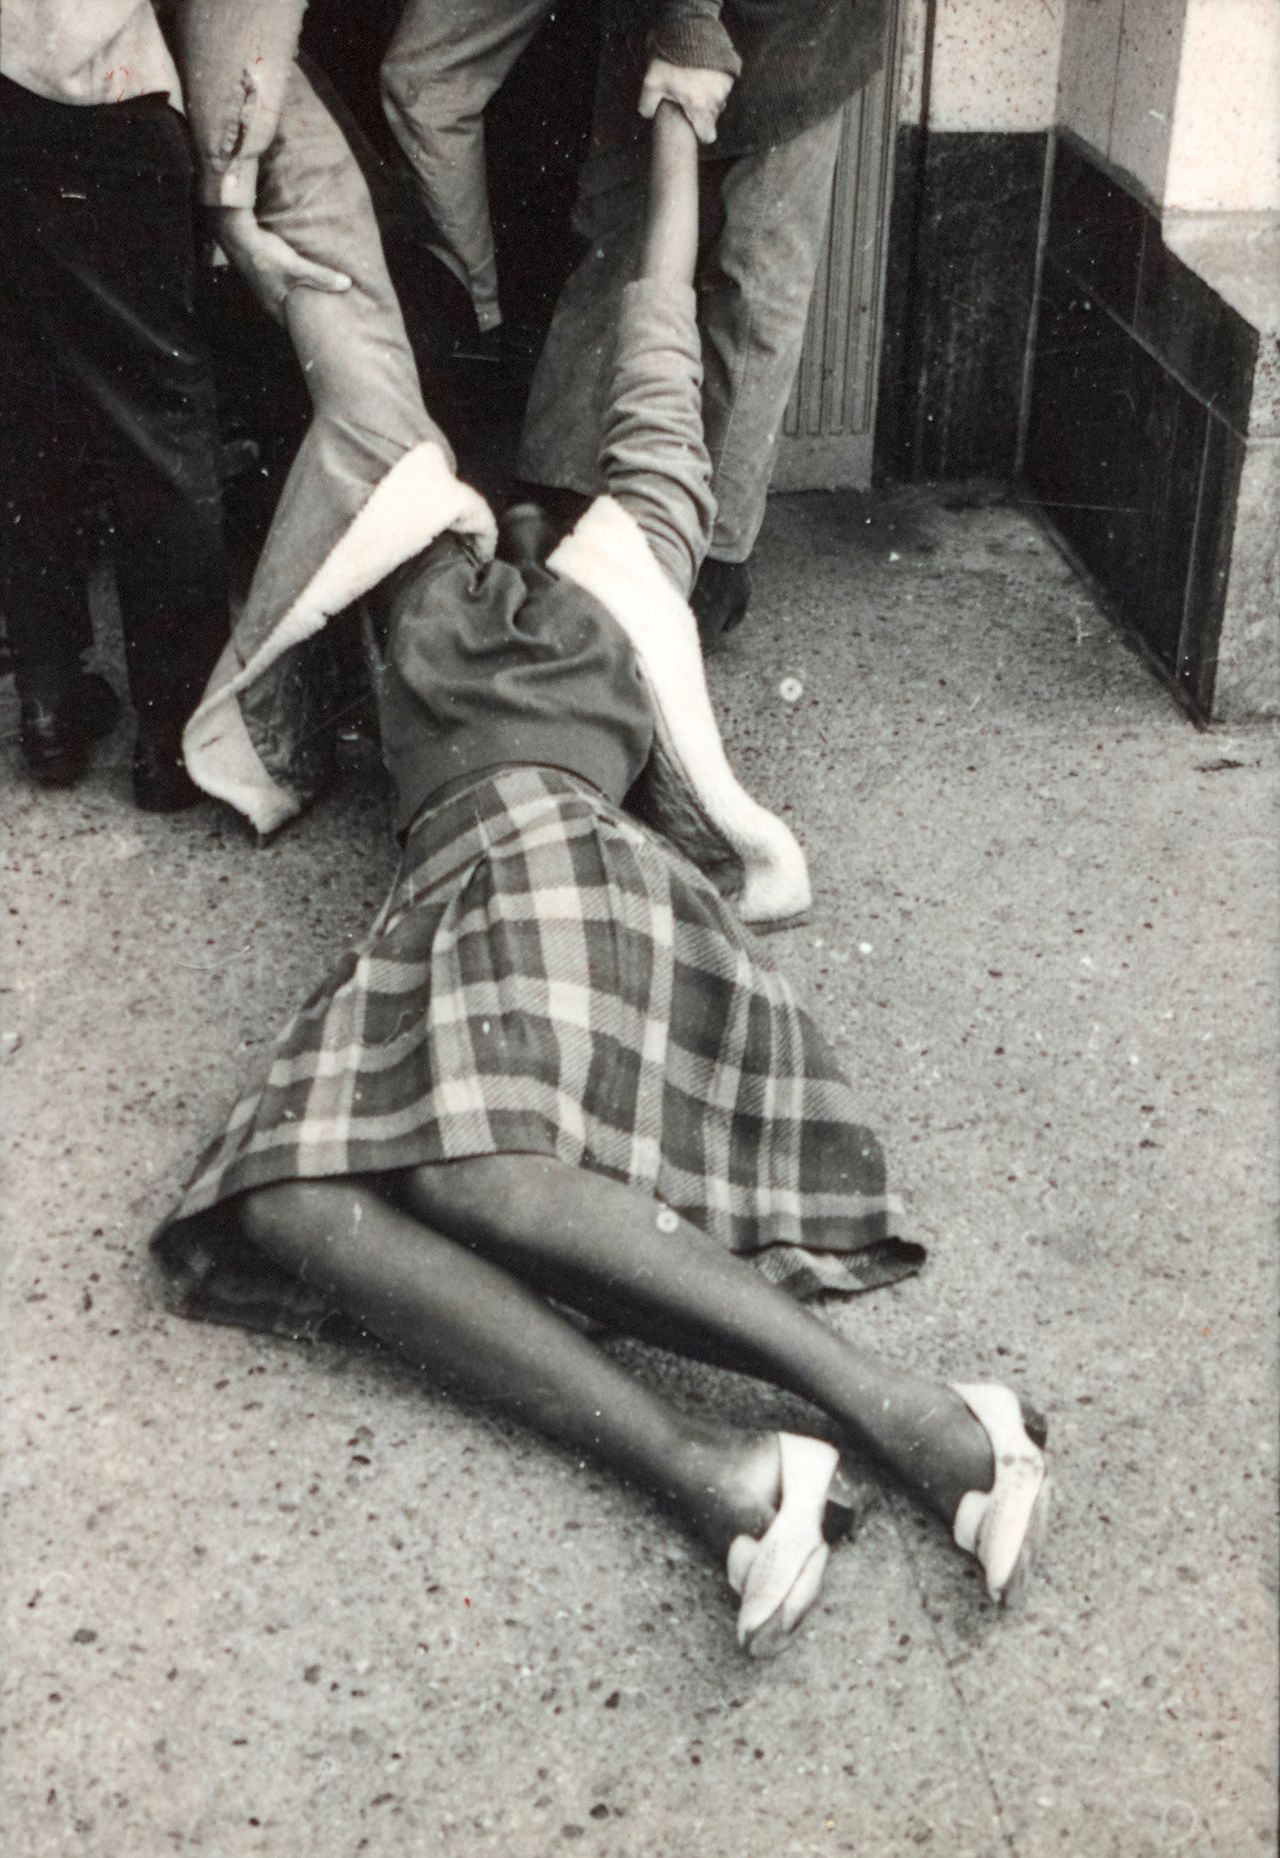 Protesters being physically removed during a demonstration against the shocking violence in Selma in March 1965. No clouds of tear gas or swinging clubs are present in these scenes outside the Federal Building in downtown Los Angeles, but Brittin’s tight focus immediately draws viewers into one of the most dramatic struggles he documented for CORE.